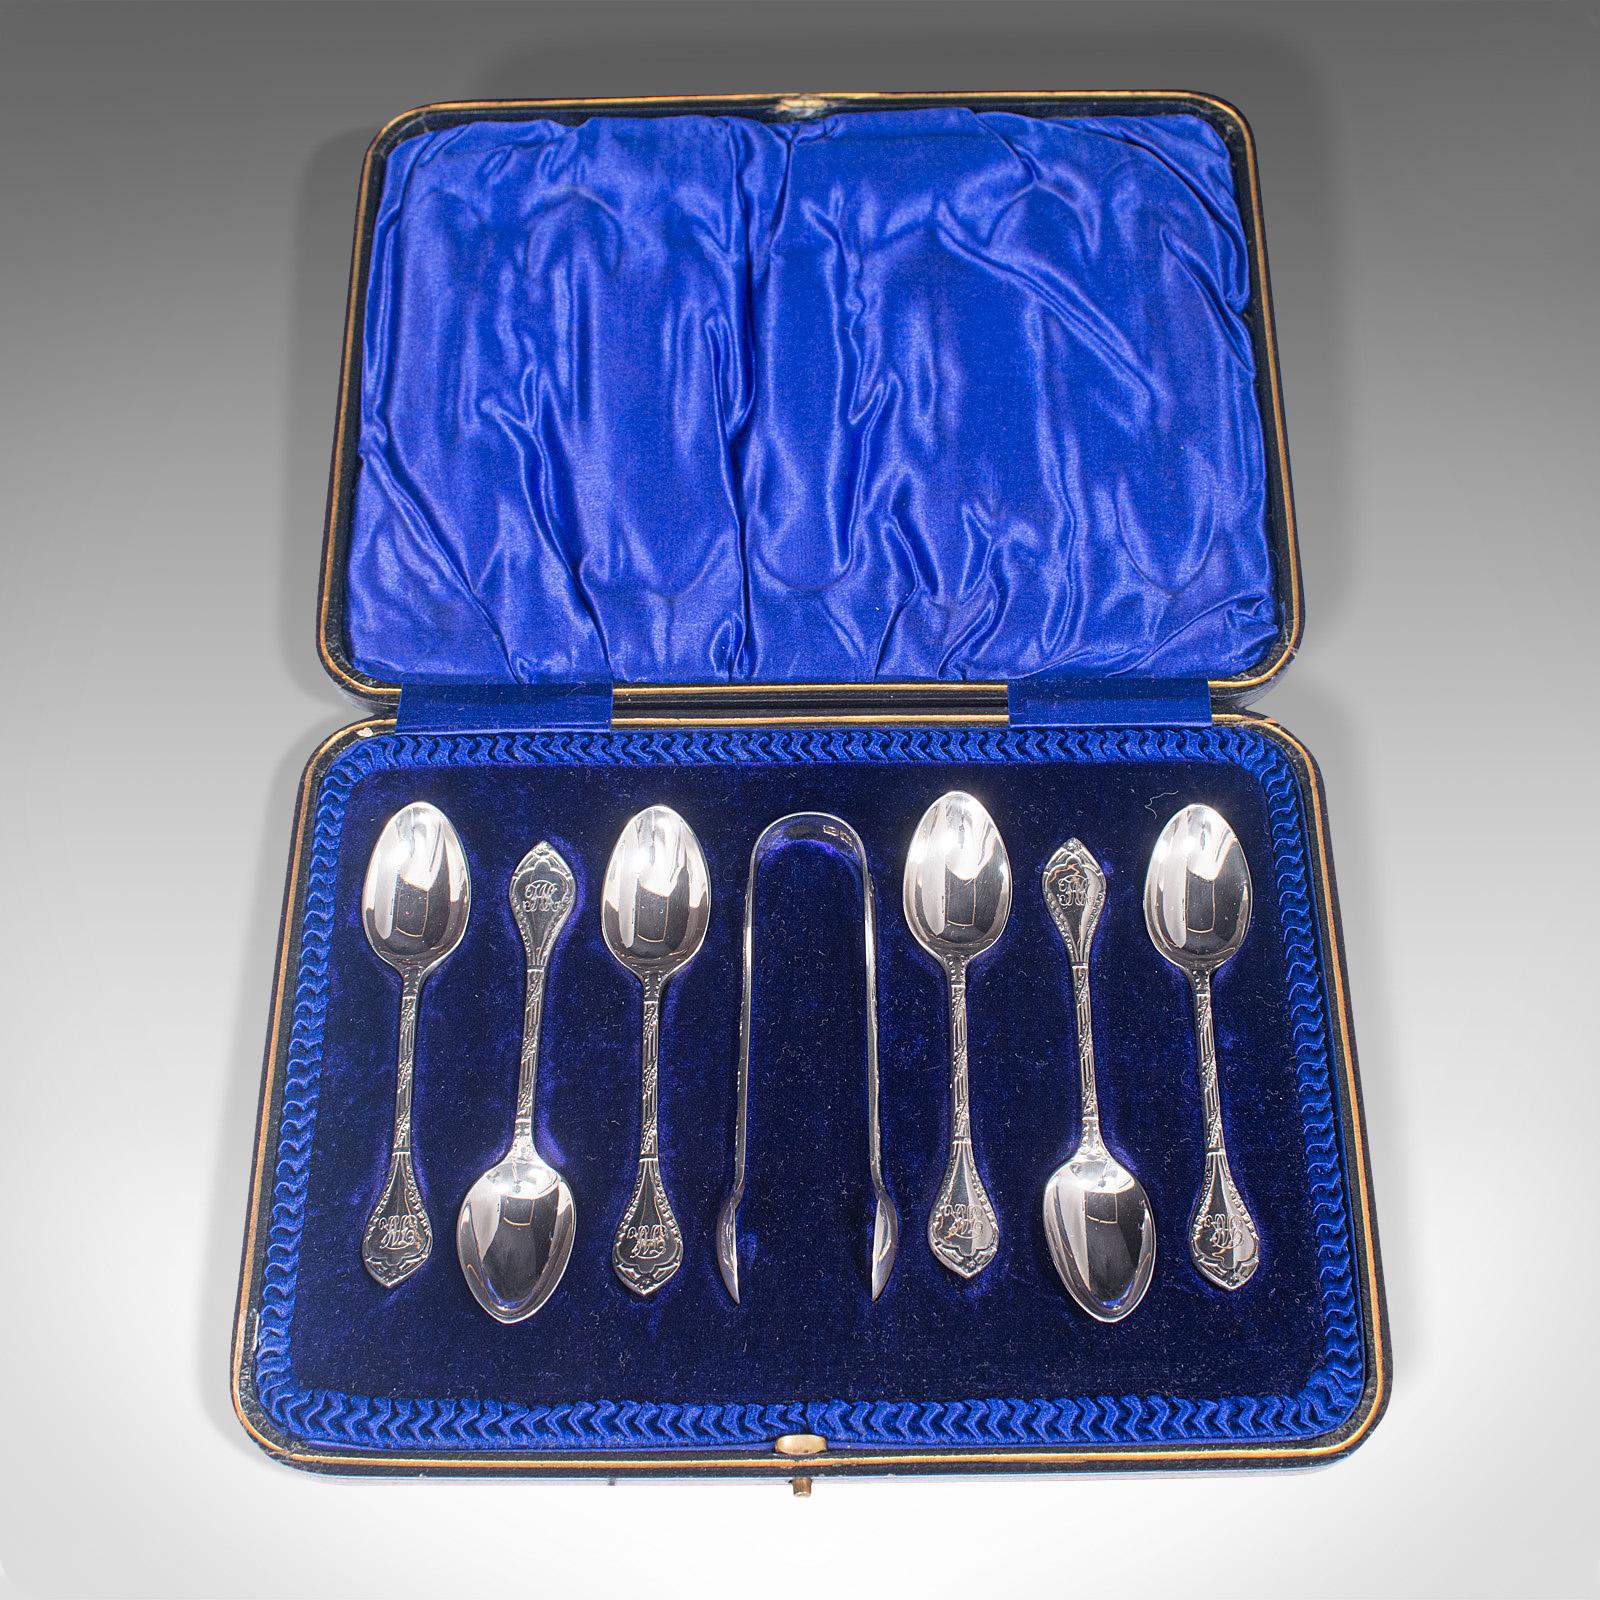 This is a set of 6 antique tea spoons. An English, silver cutlery case with tongs, hallmarked in the late Victorian period, 1900.

Beautifully presented set with delicate, ornate detail
Displays a desirable aged patina throughout
Quality silver